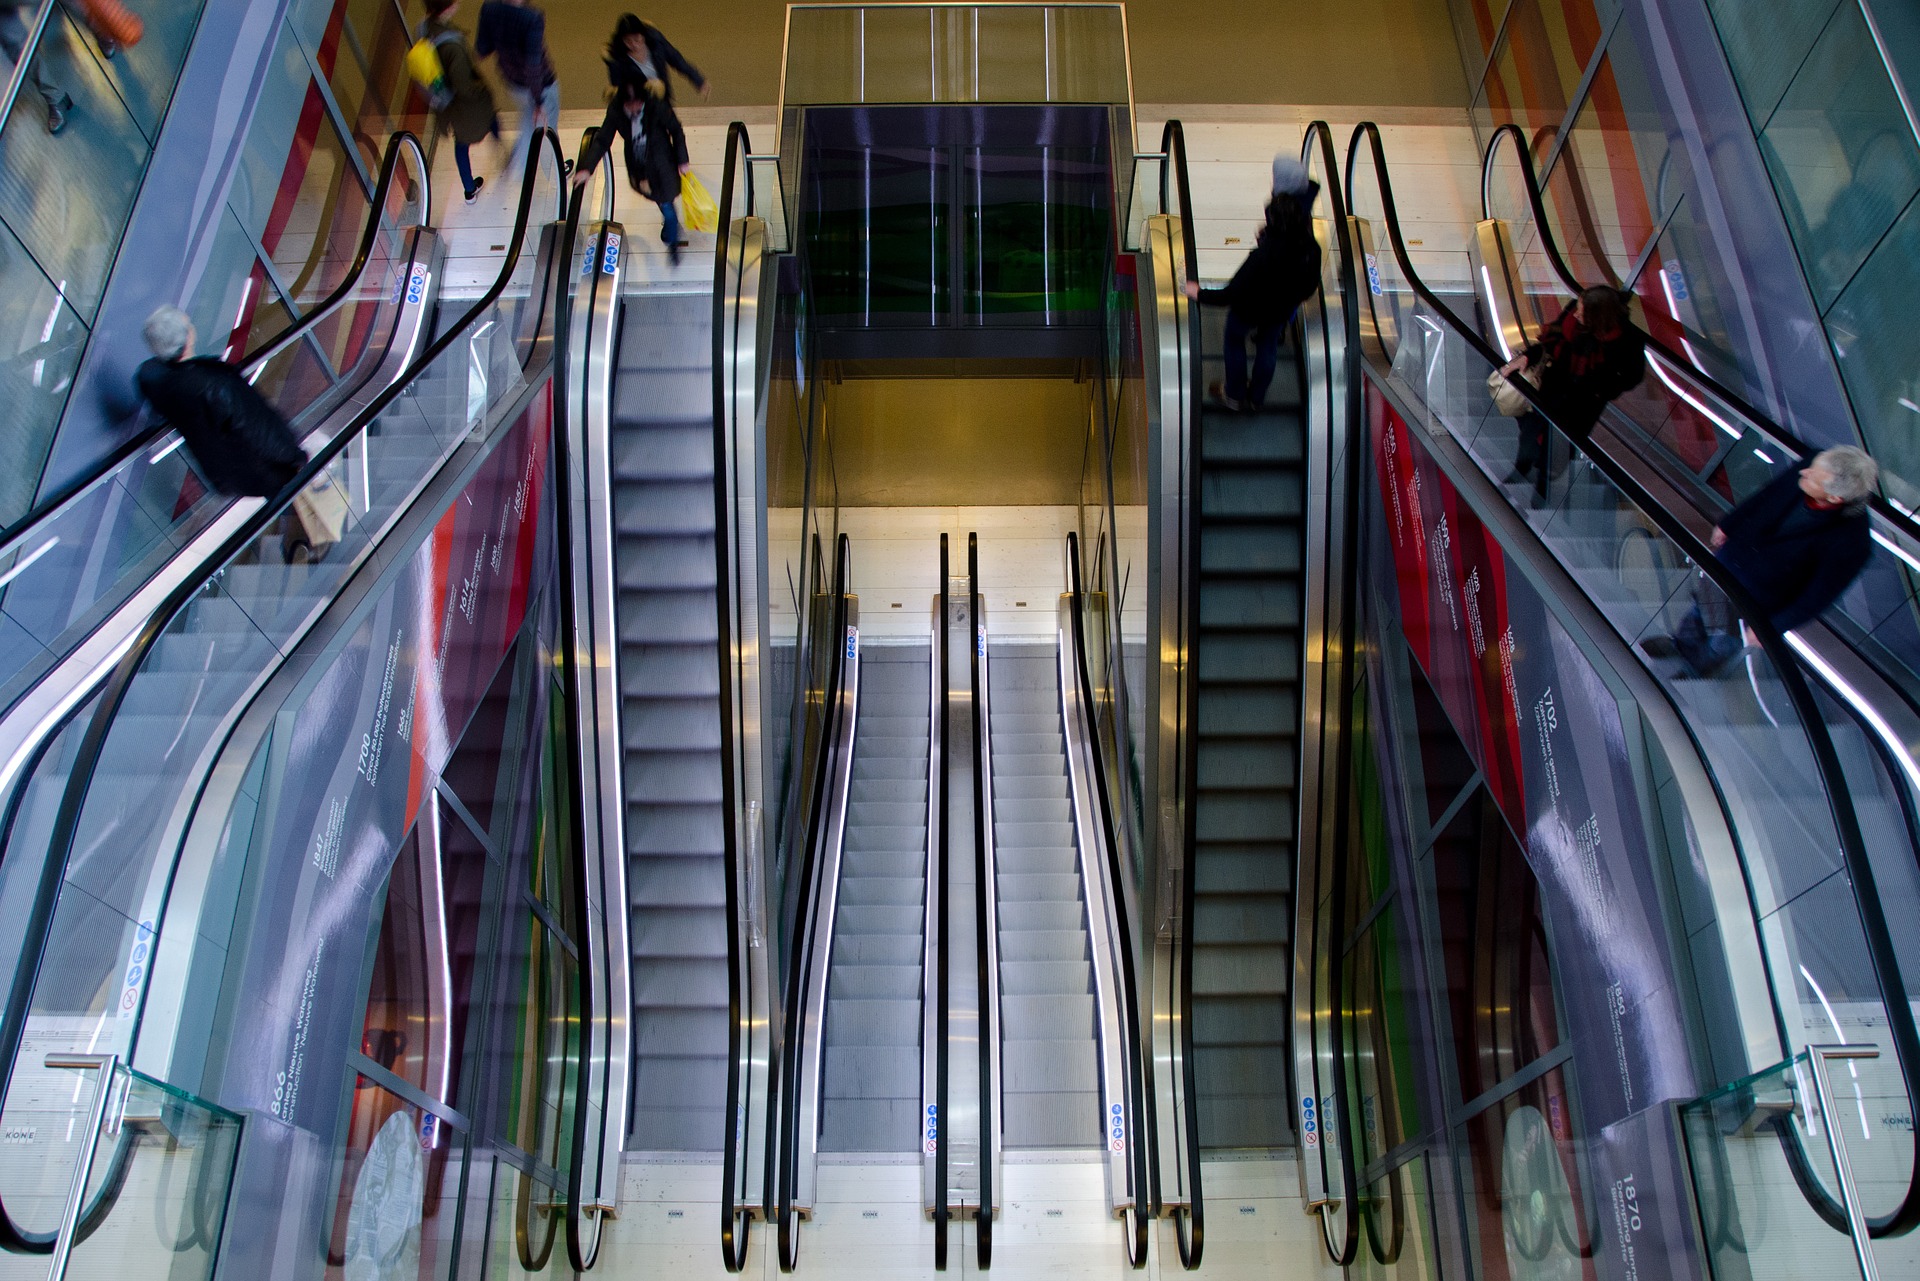 Escalators in the Building, Building, Electronic, Escalator, Stair, HQ Photo